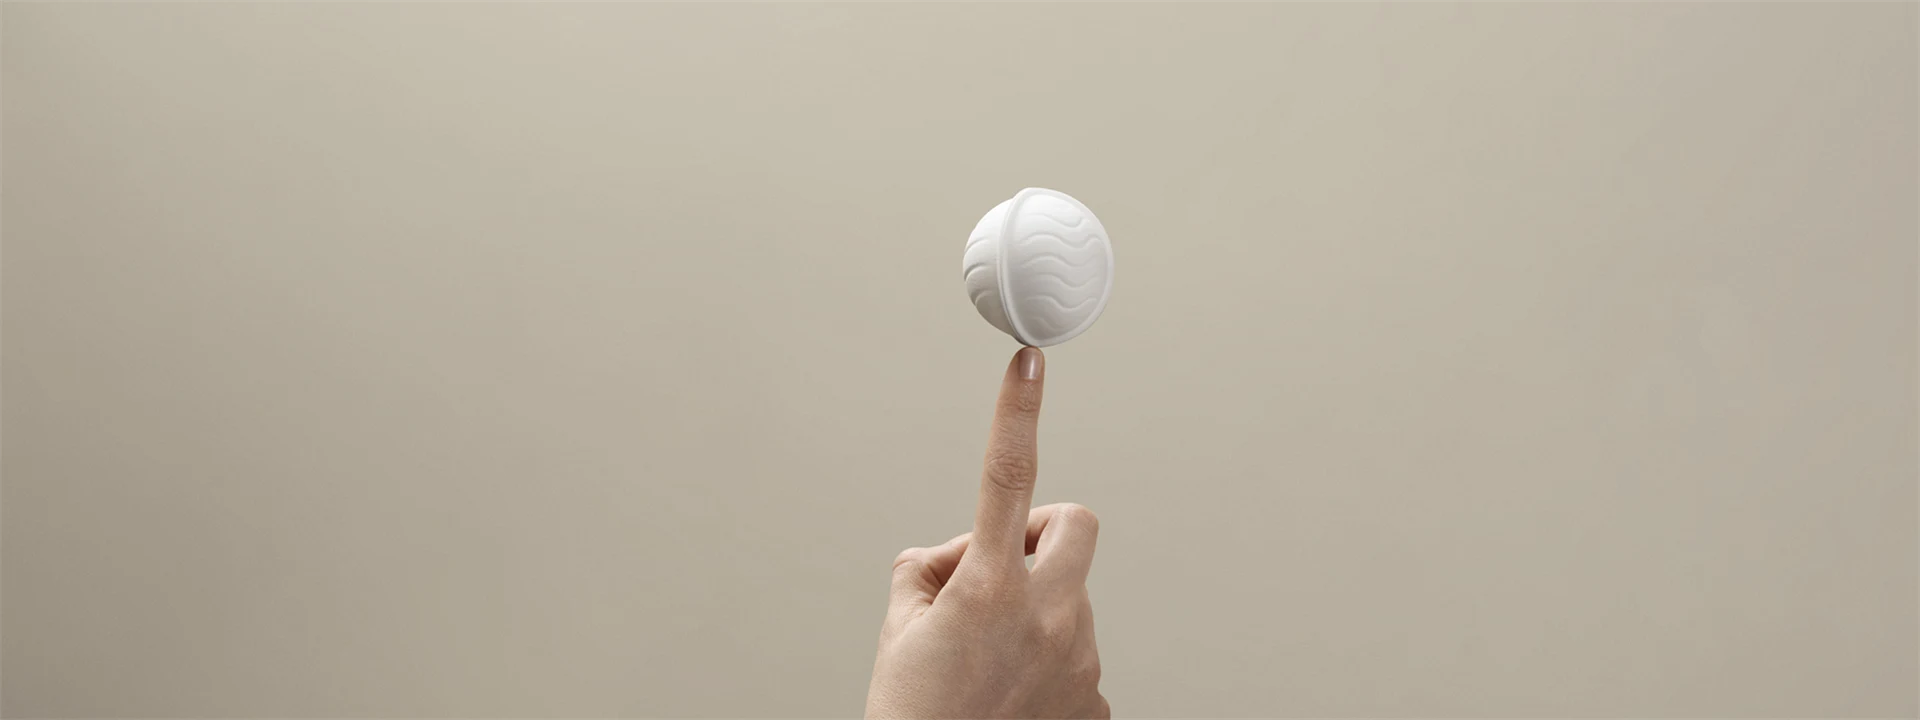 White wood-based packaging in the shape of a ball, balancing on a fingertip